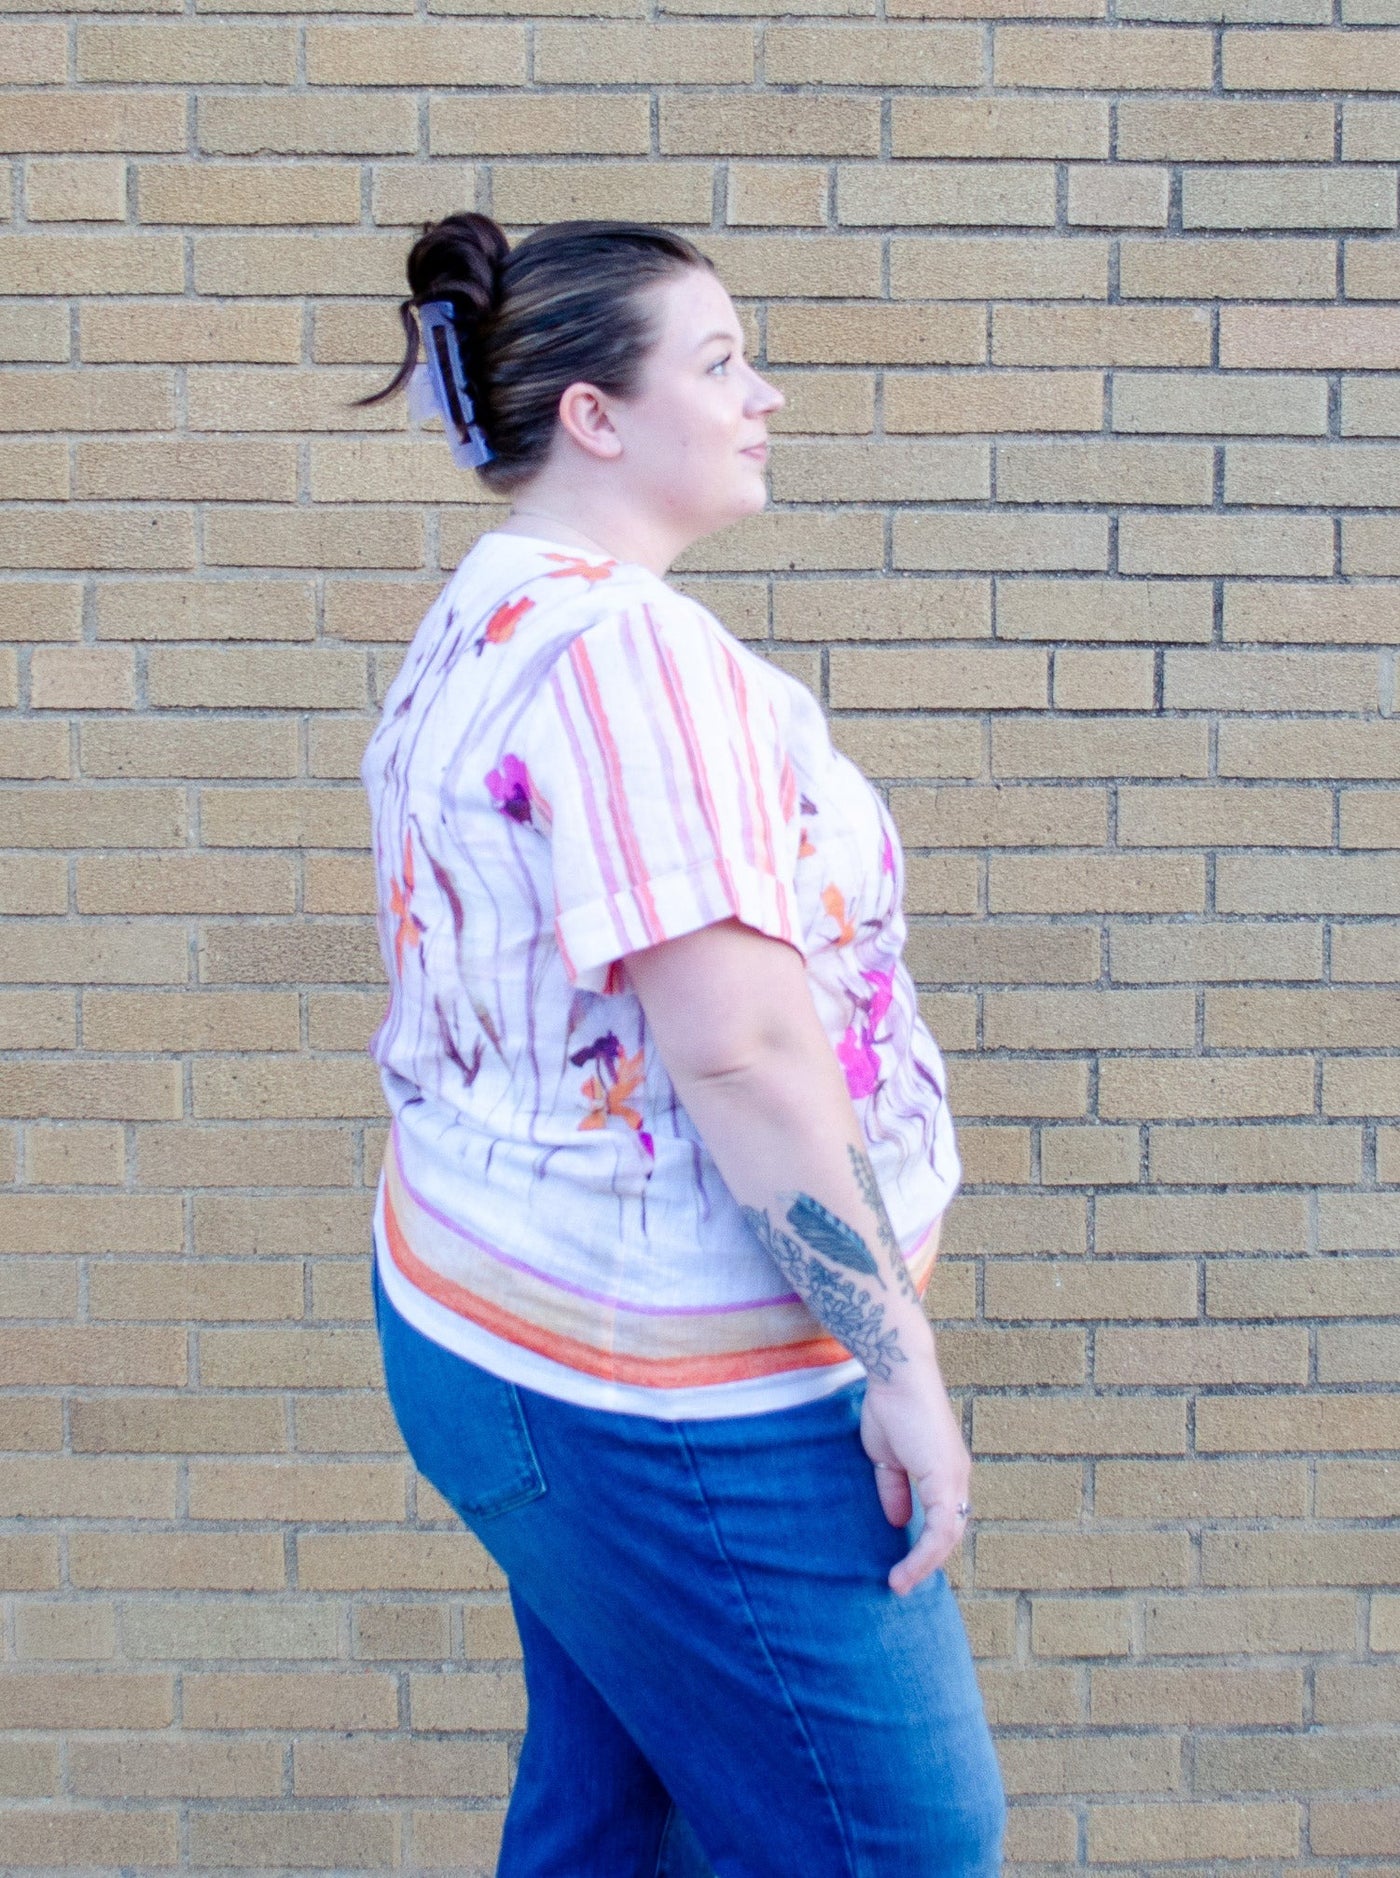 Model is wearing a linen pink and orange accented floral top paired with blue jeans.